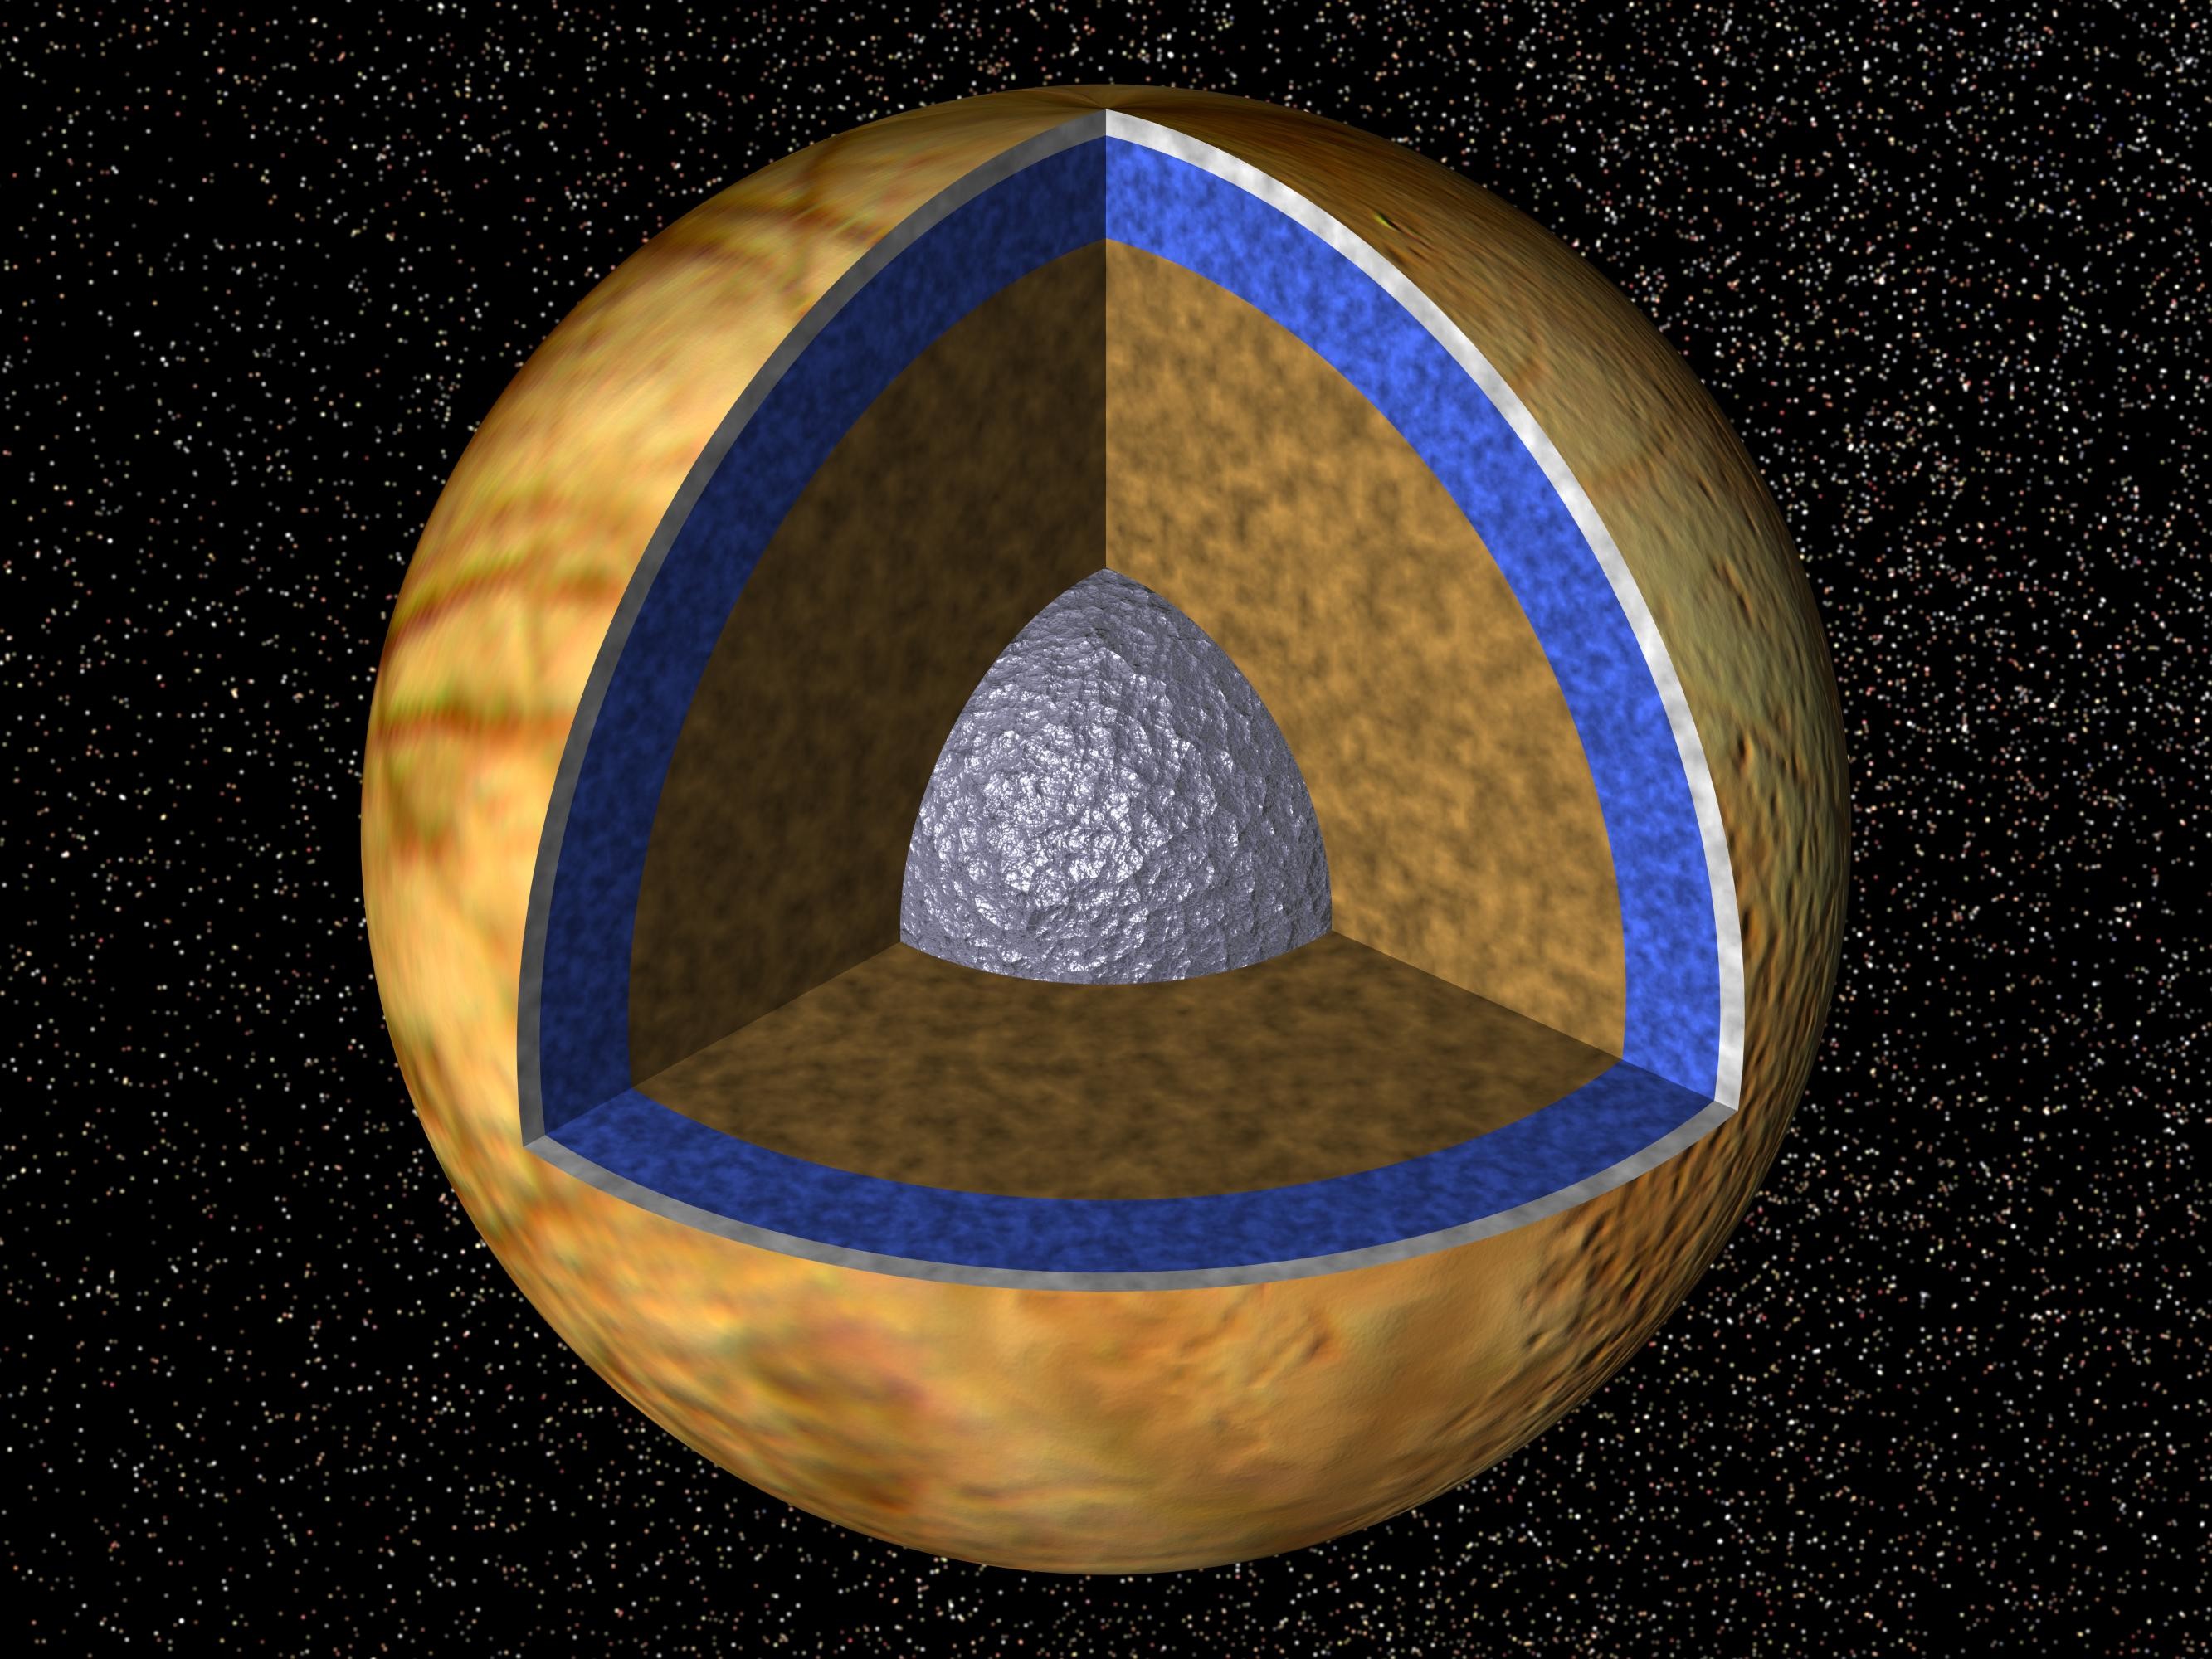 Cutaway view of Europa, showing (from inside out) the metallic core, thick layer of rock, the undersurface ocean, and the shell of ice on the surface. Credit: NASA/JPL